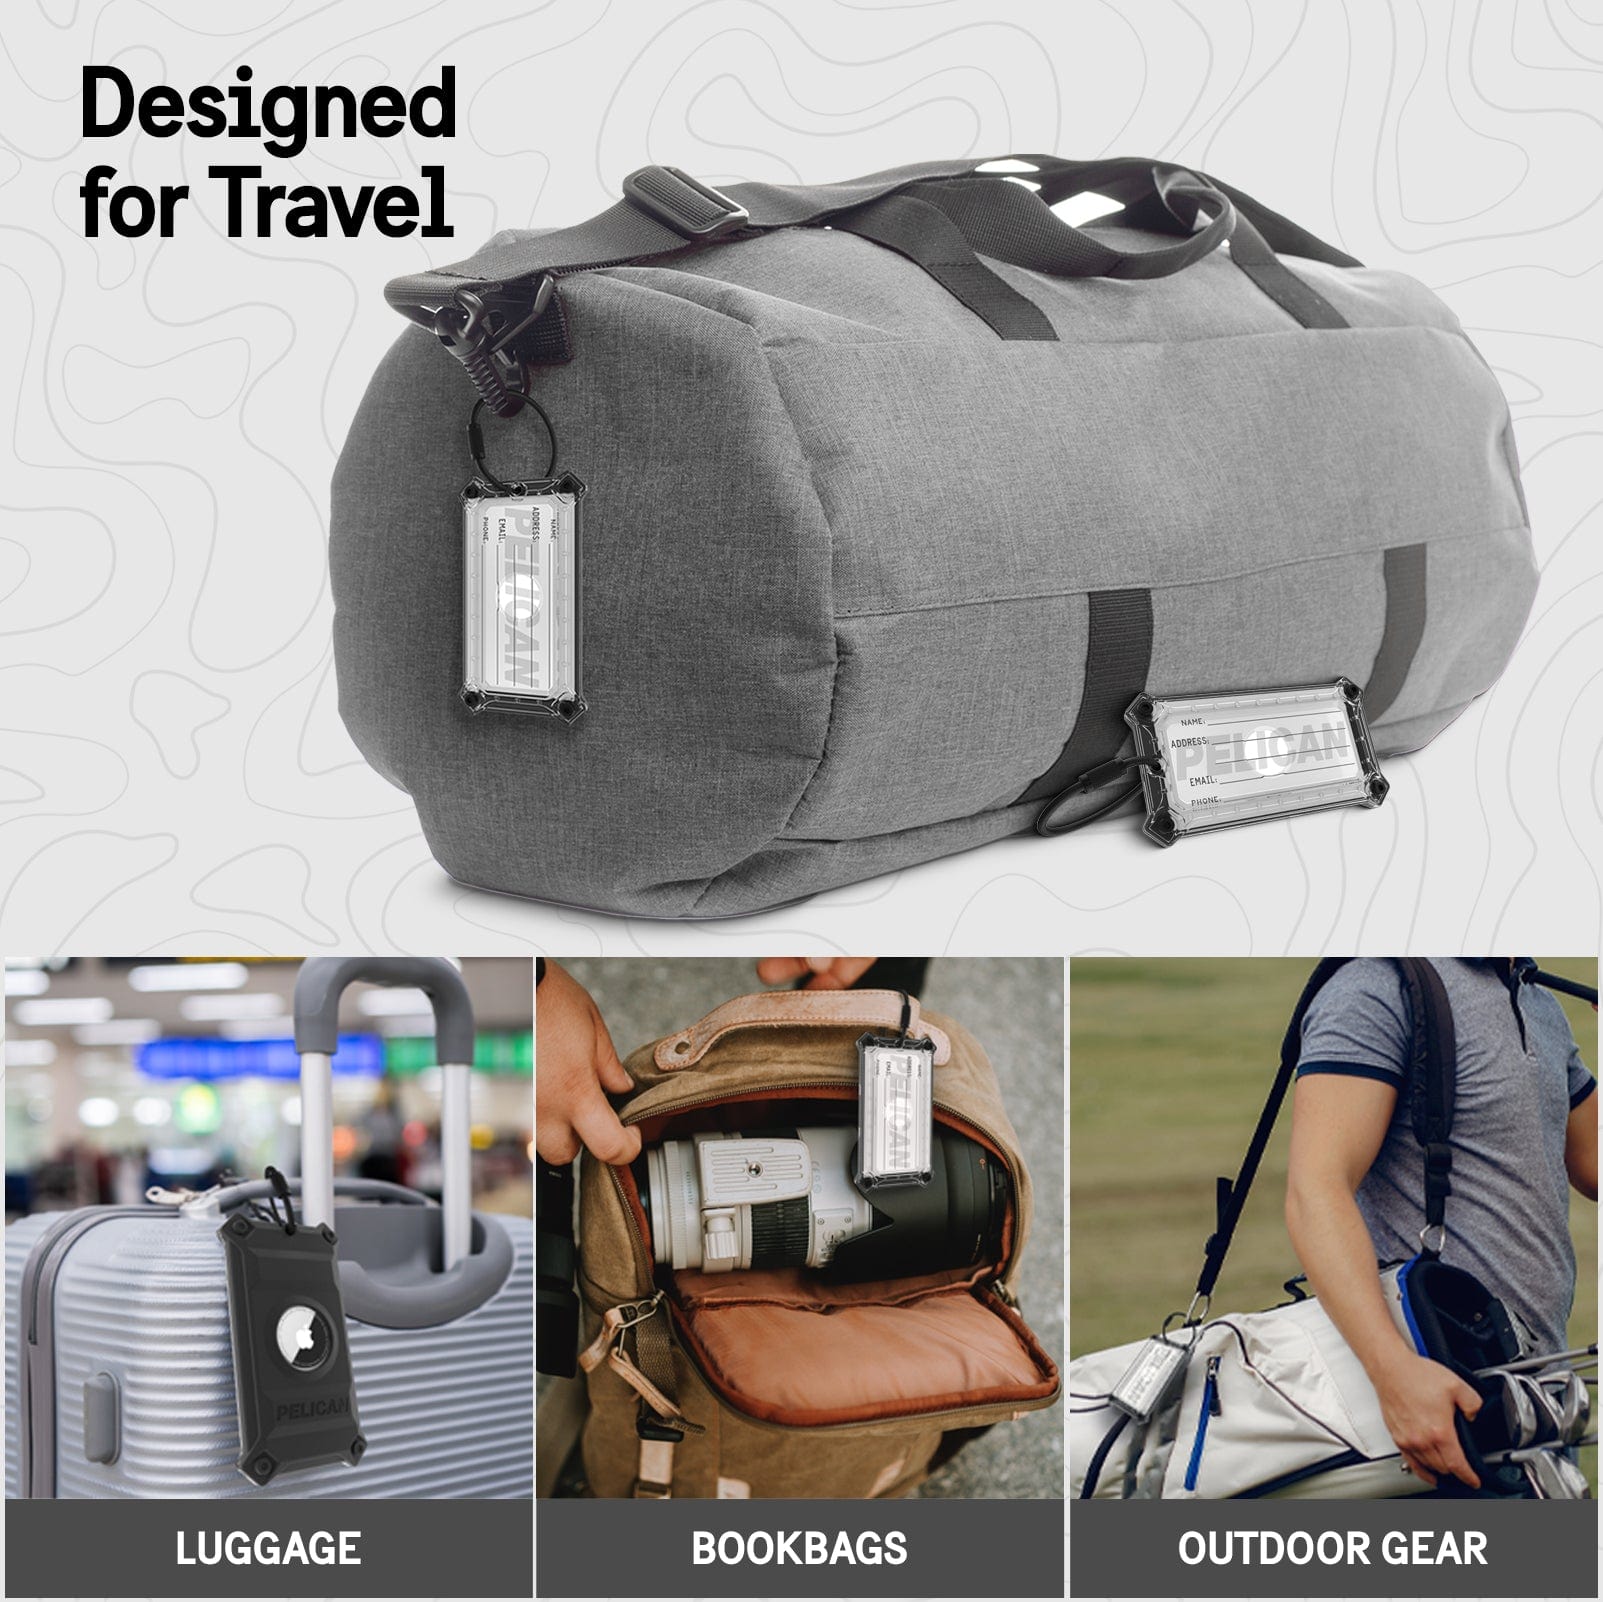 DESIGNED FOR TRAVEL. LUGGAGE, BOOKBAGS, OUTDOOR GEAR.